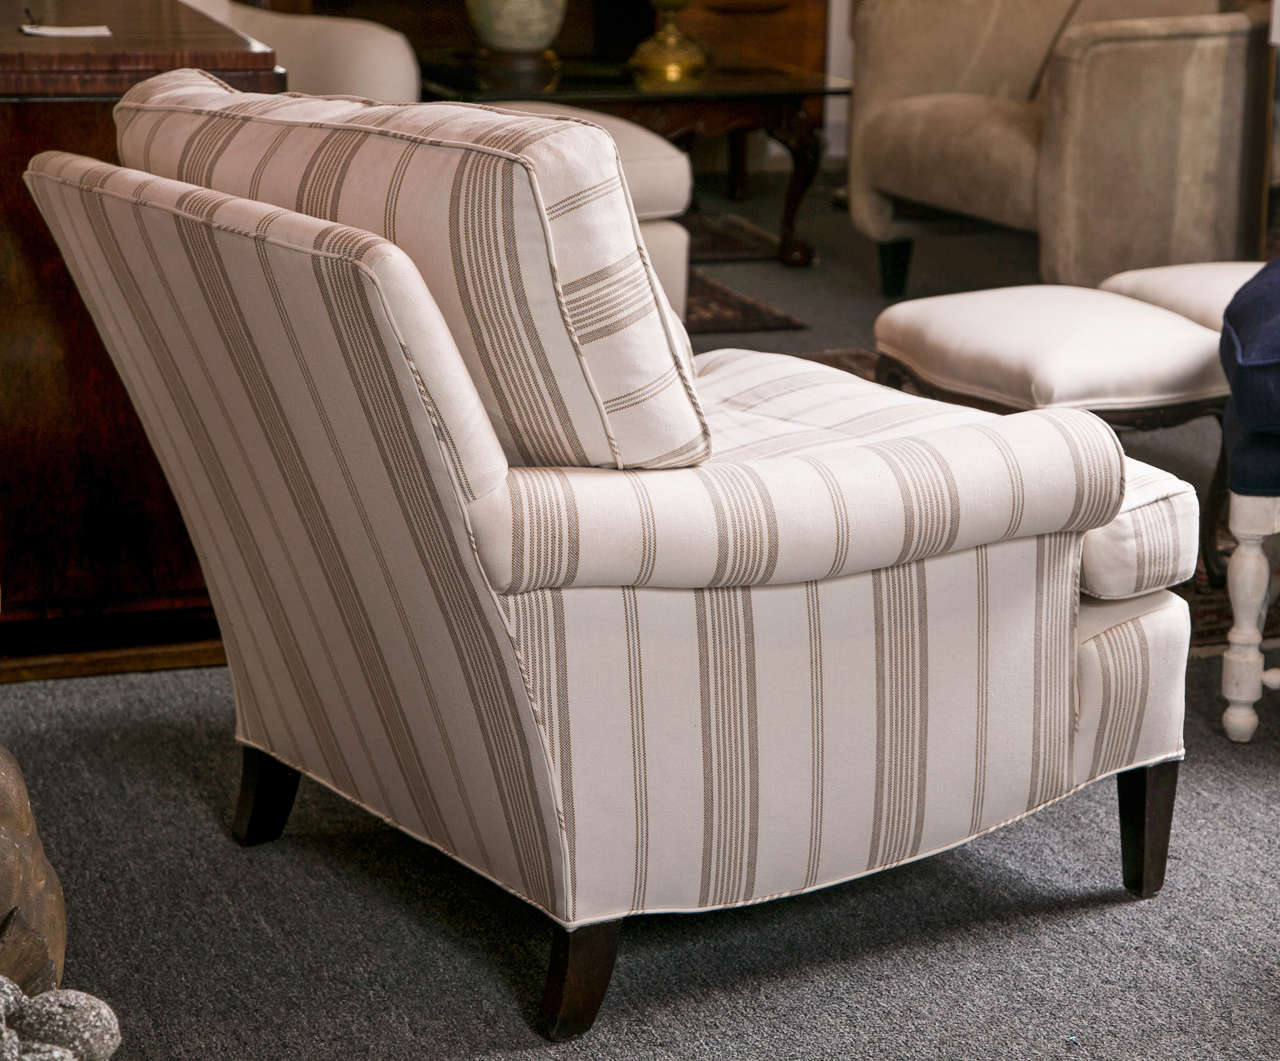 20th Century Striped Club Chair with Ottoman